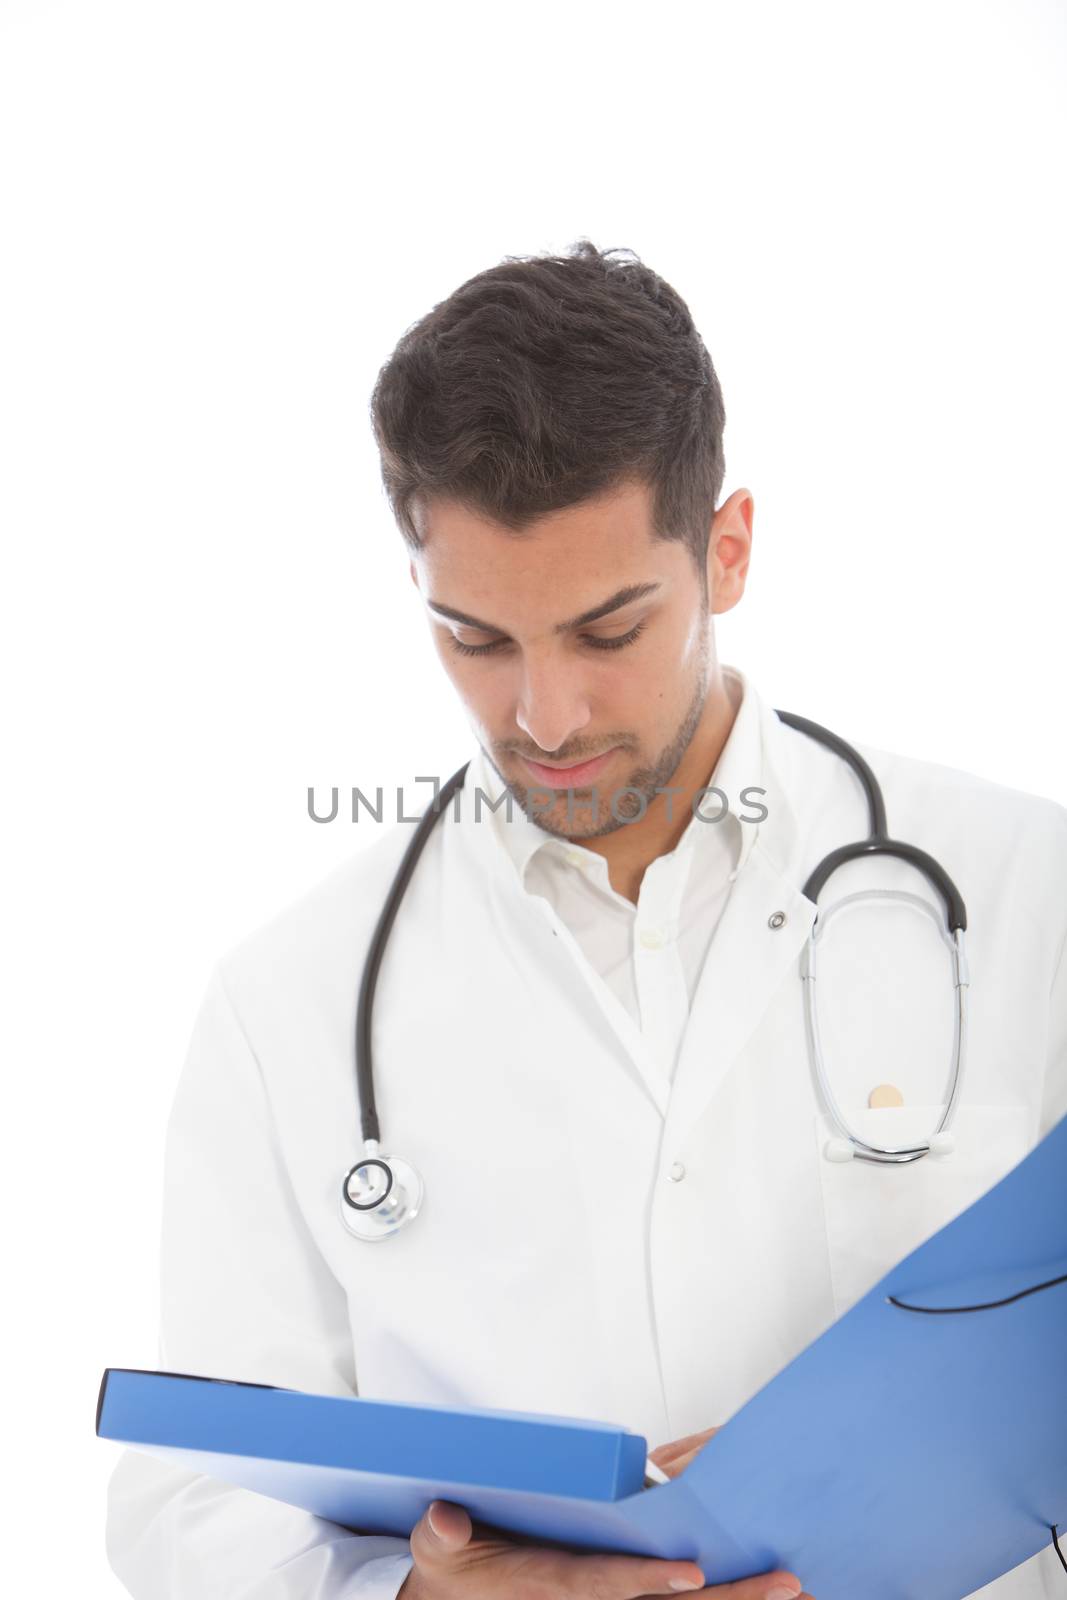 Handsome young male doctor standing reading a patients records in a large blue folder as he conducts his ward rounds